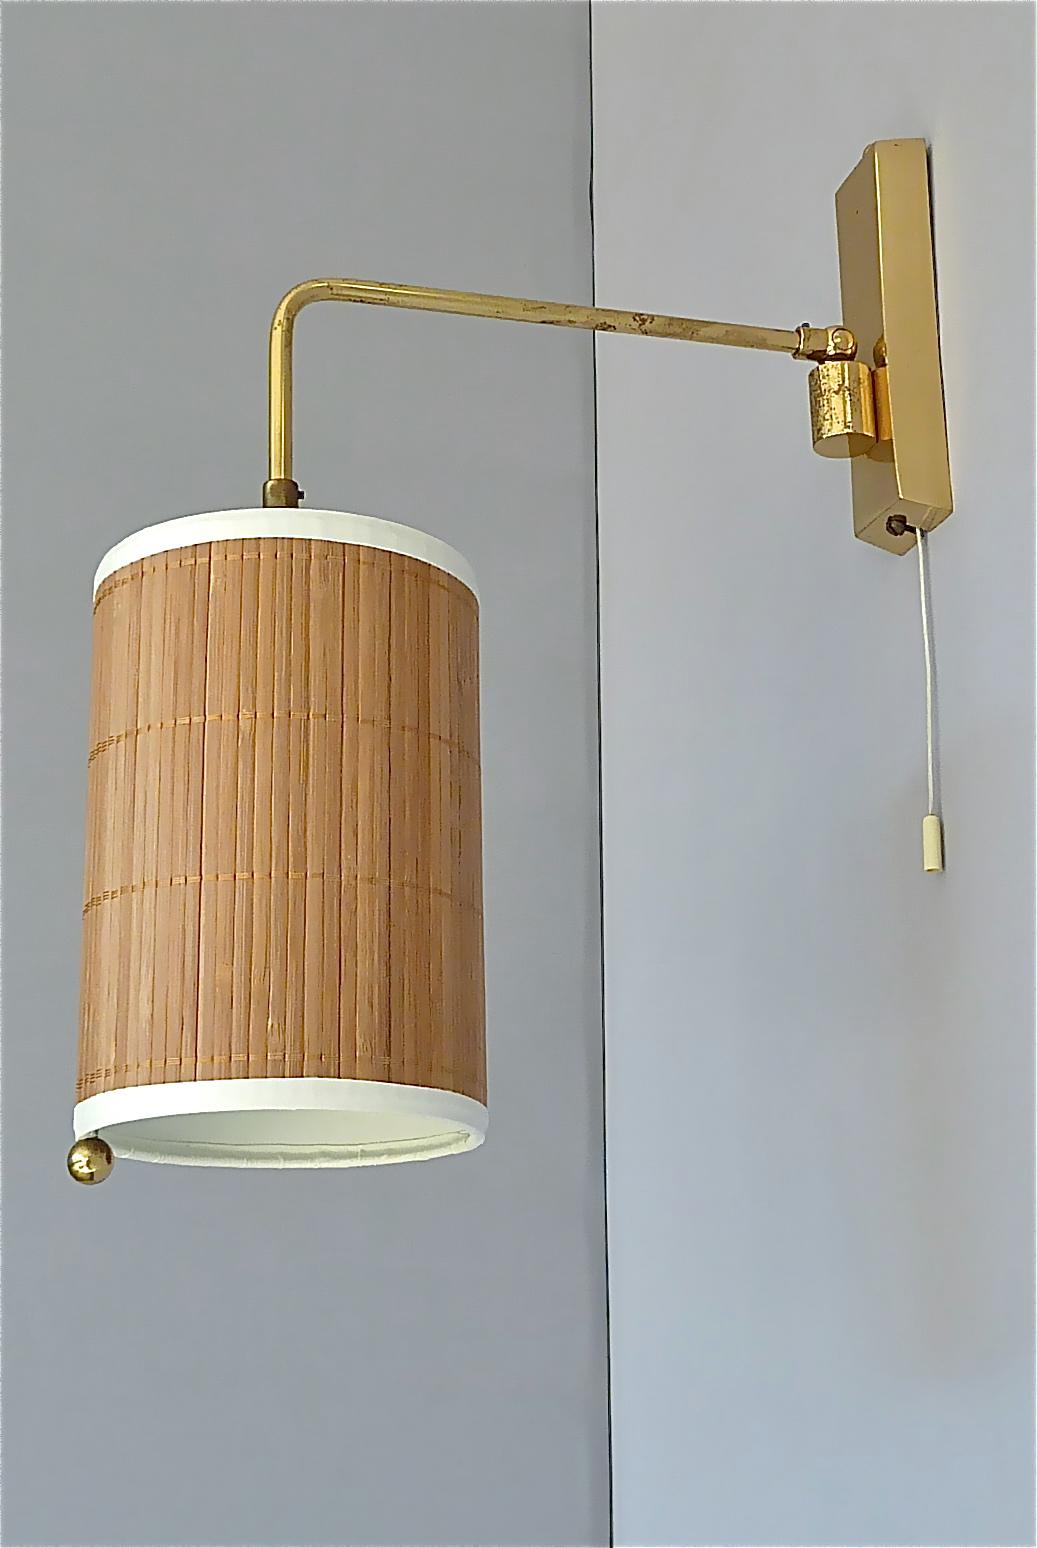 Wall Lamp Paavo Tynell Taito Oy Kalmar Style Brass Cane Wood Shade 1950s Sconce For Sale 10